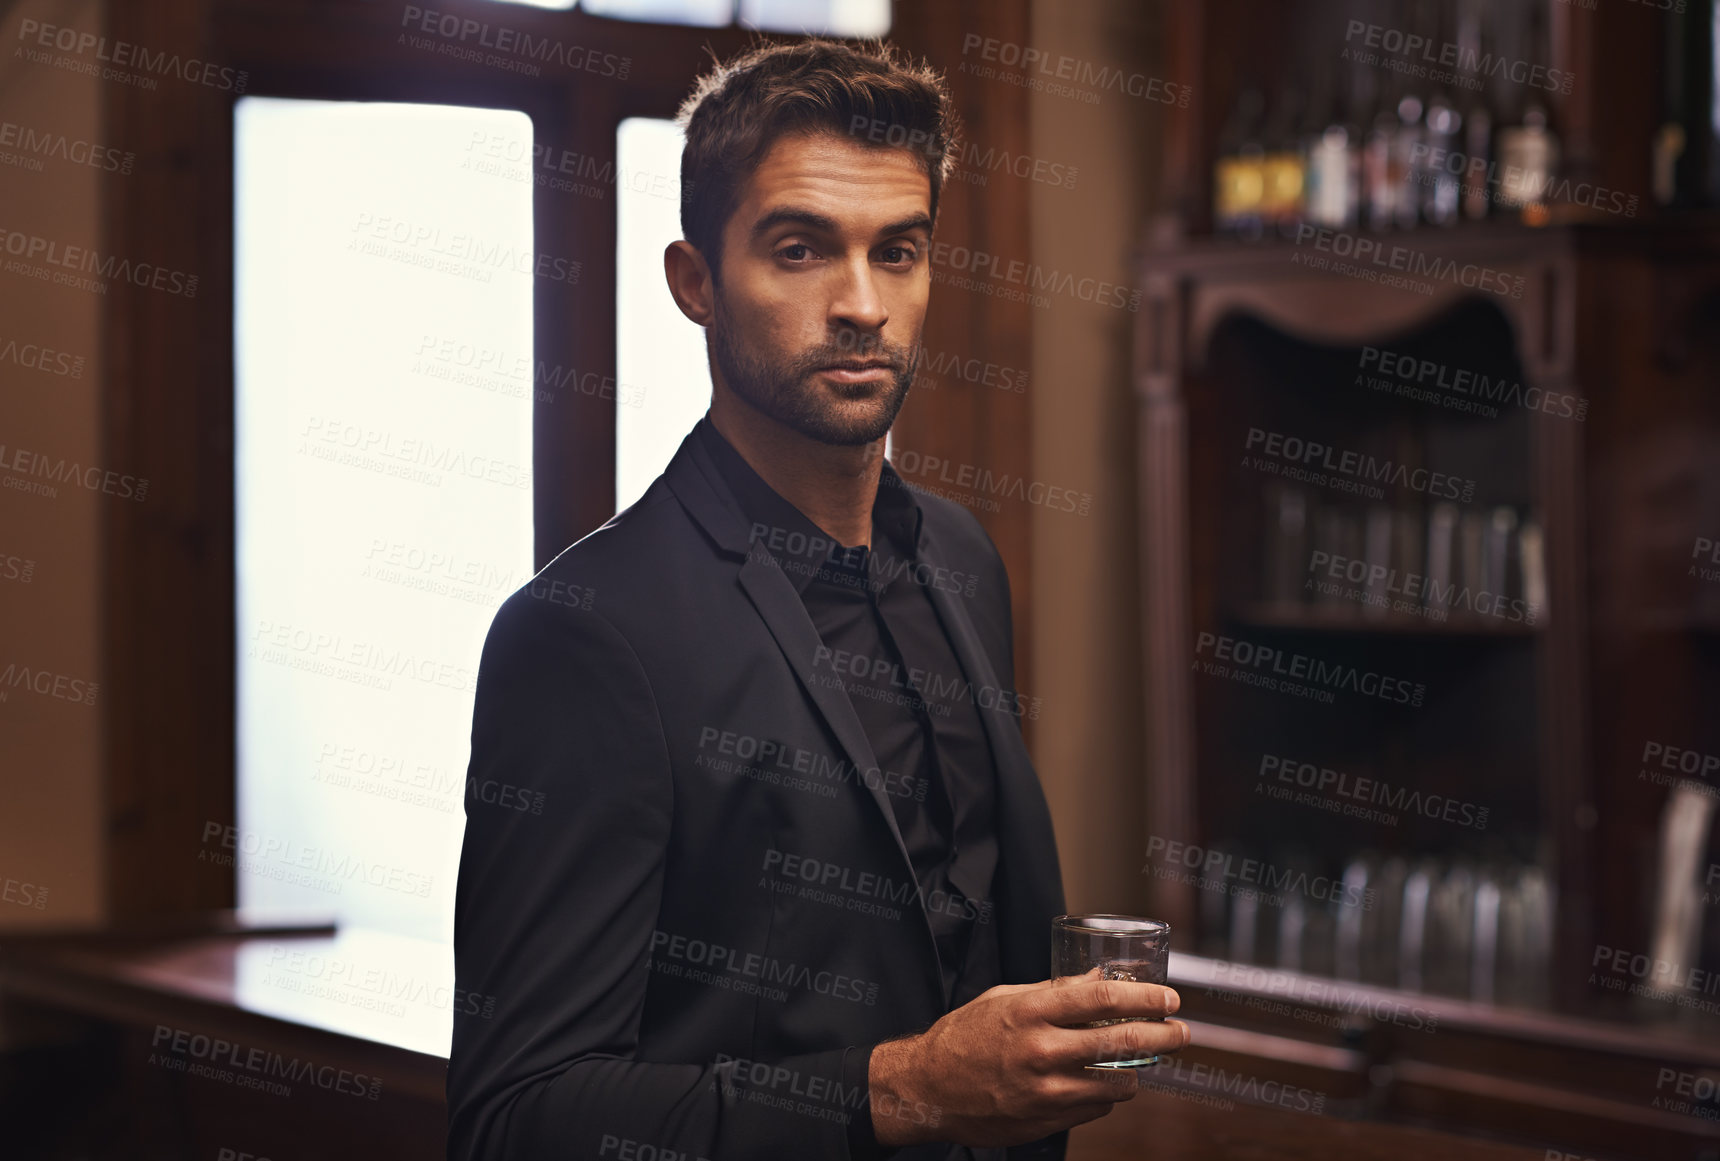 Buy stock photo Businessman, confident portrait or alcohol on break in hotel or drink to relax on corporate trip. Entrepreneur, pub or serious face by glass of whisky for leisure or young professional on work travel